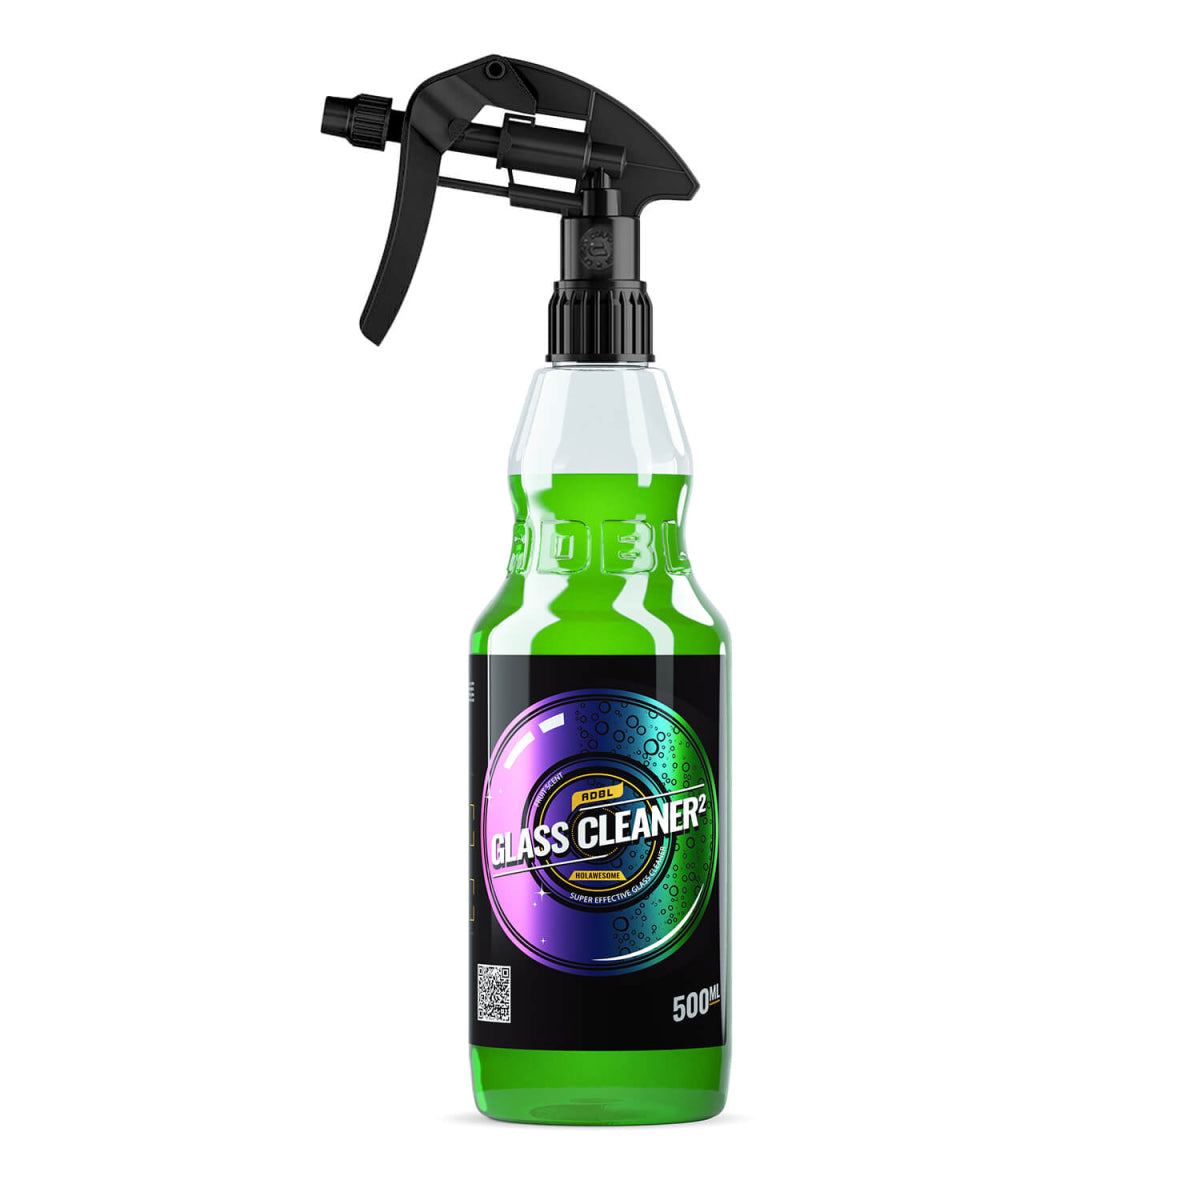 ADBL HOLAWESOME Glass Cleaner 2 Glasreiniger mit Canyon Trigger 500ml-  9307